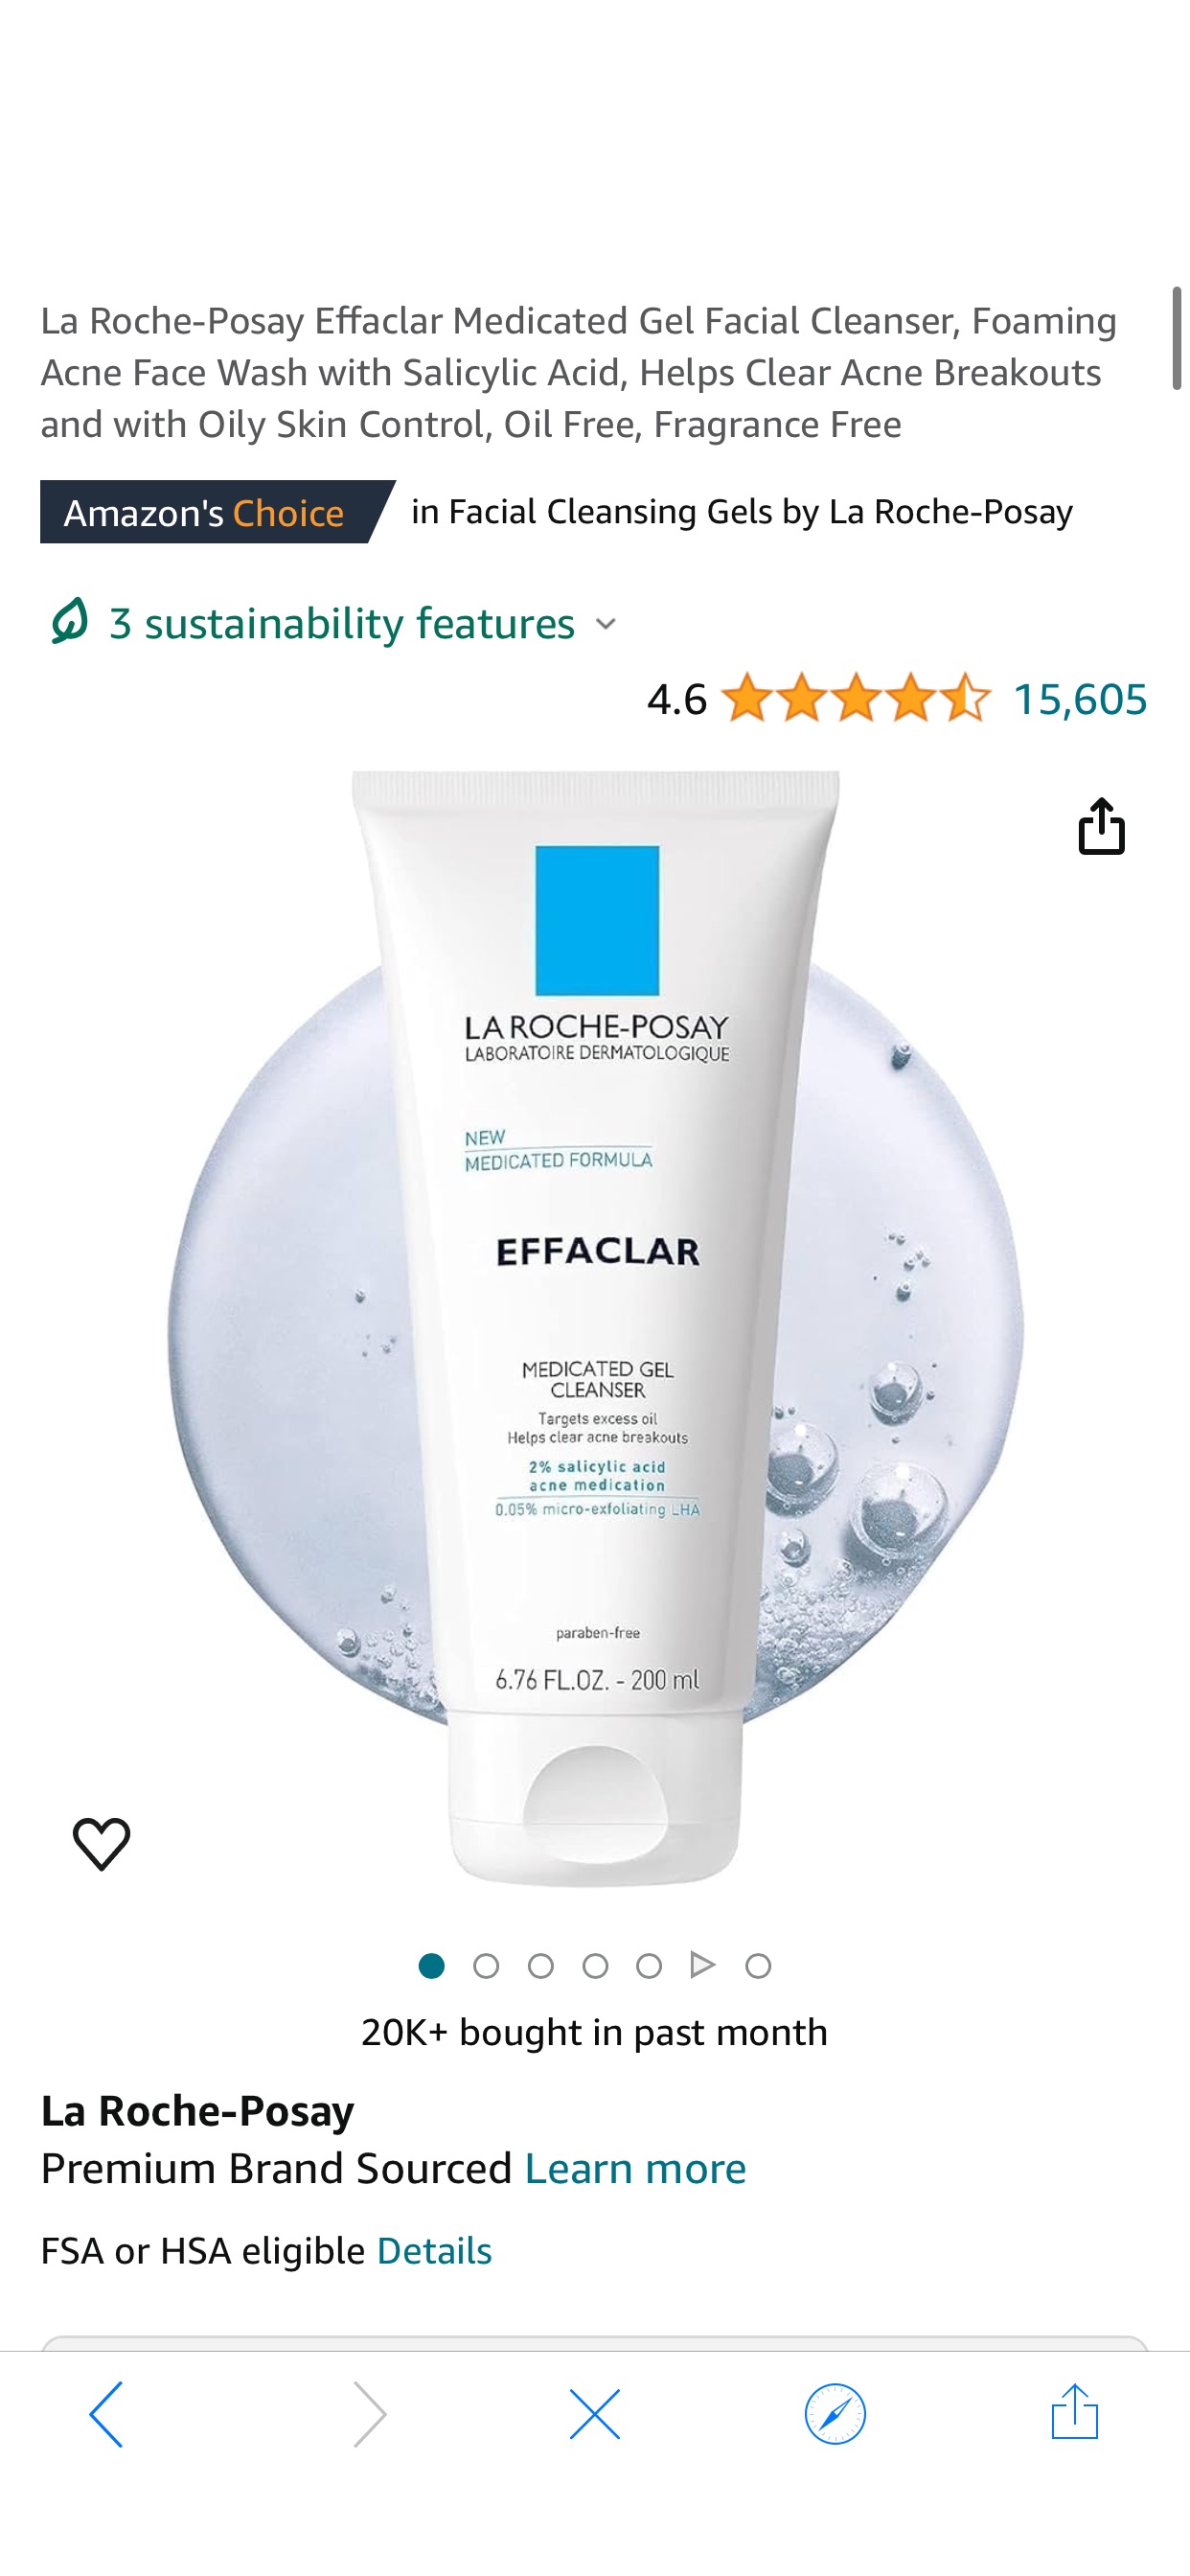 Amazon.com: La Roche-Posay Effaclar Medicated Gel Facial Cleanser, Foaming Acne Face Wash with Salicylic Acid, Helps Clear Acne Breakouts and with Oily Skin Control, Oil Free, Fragrance Free : Beauty 